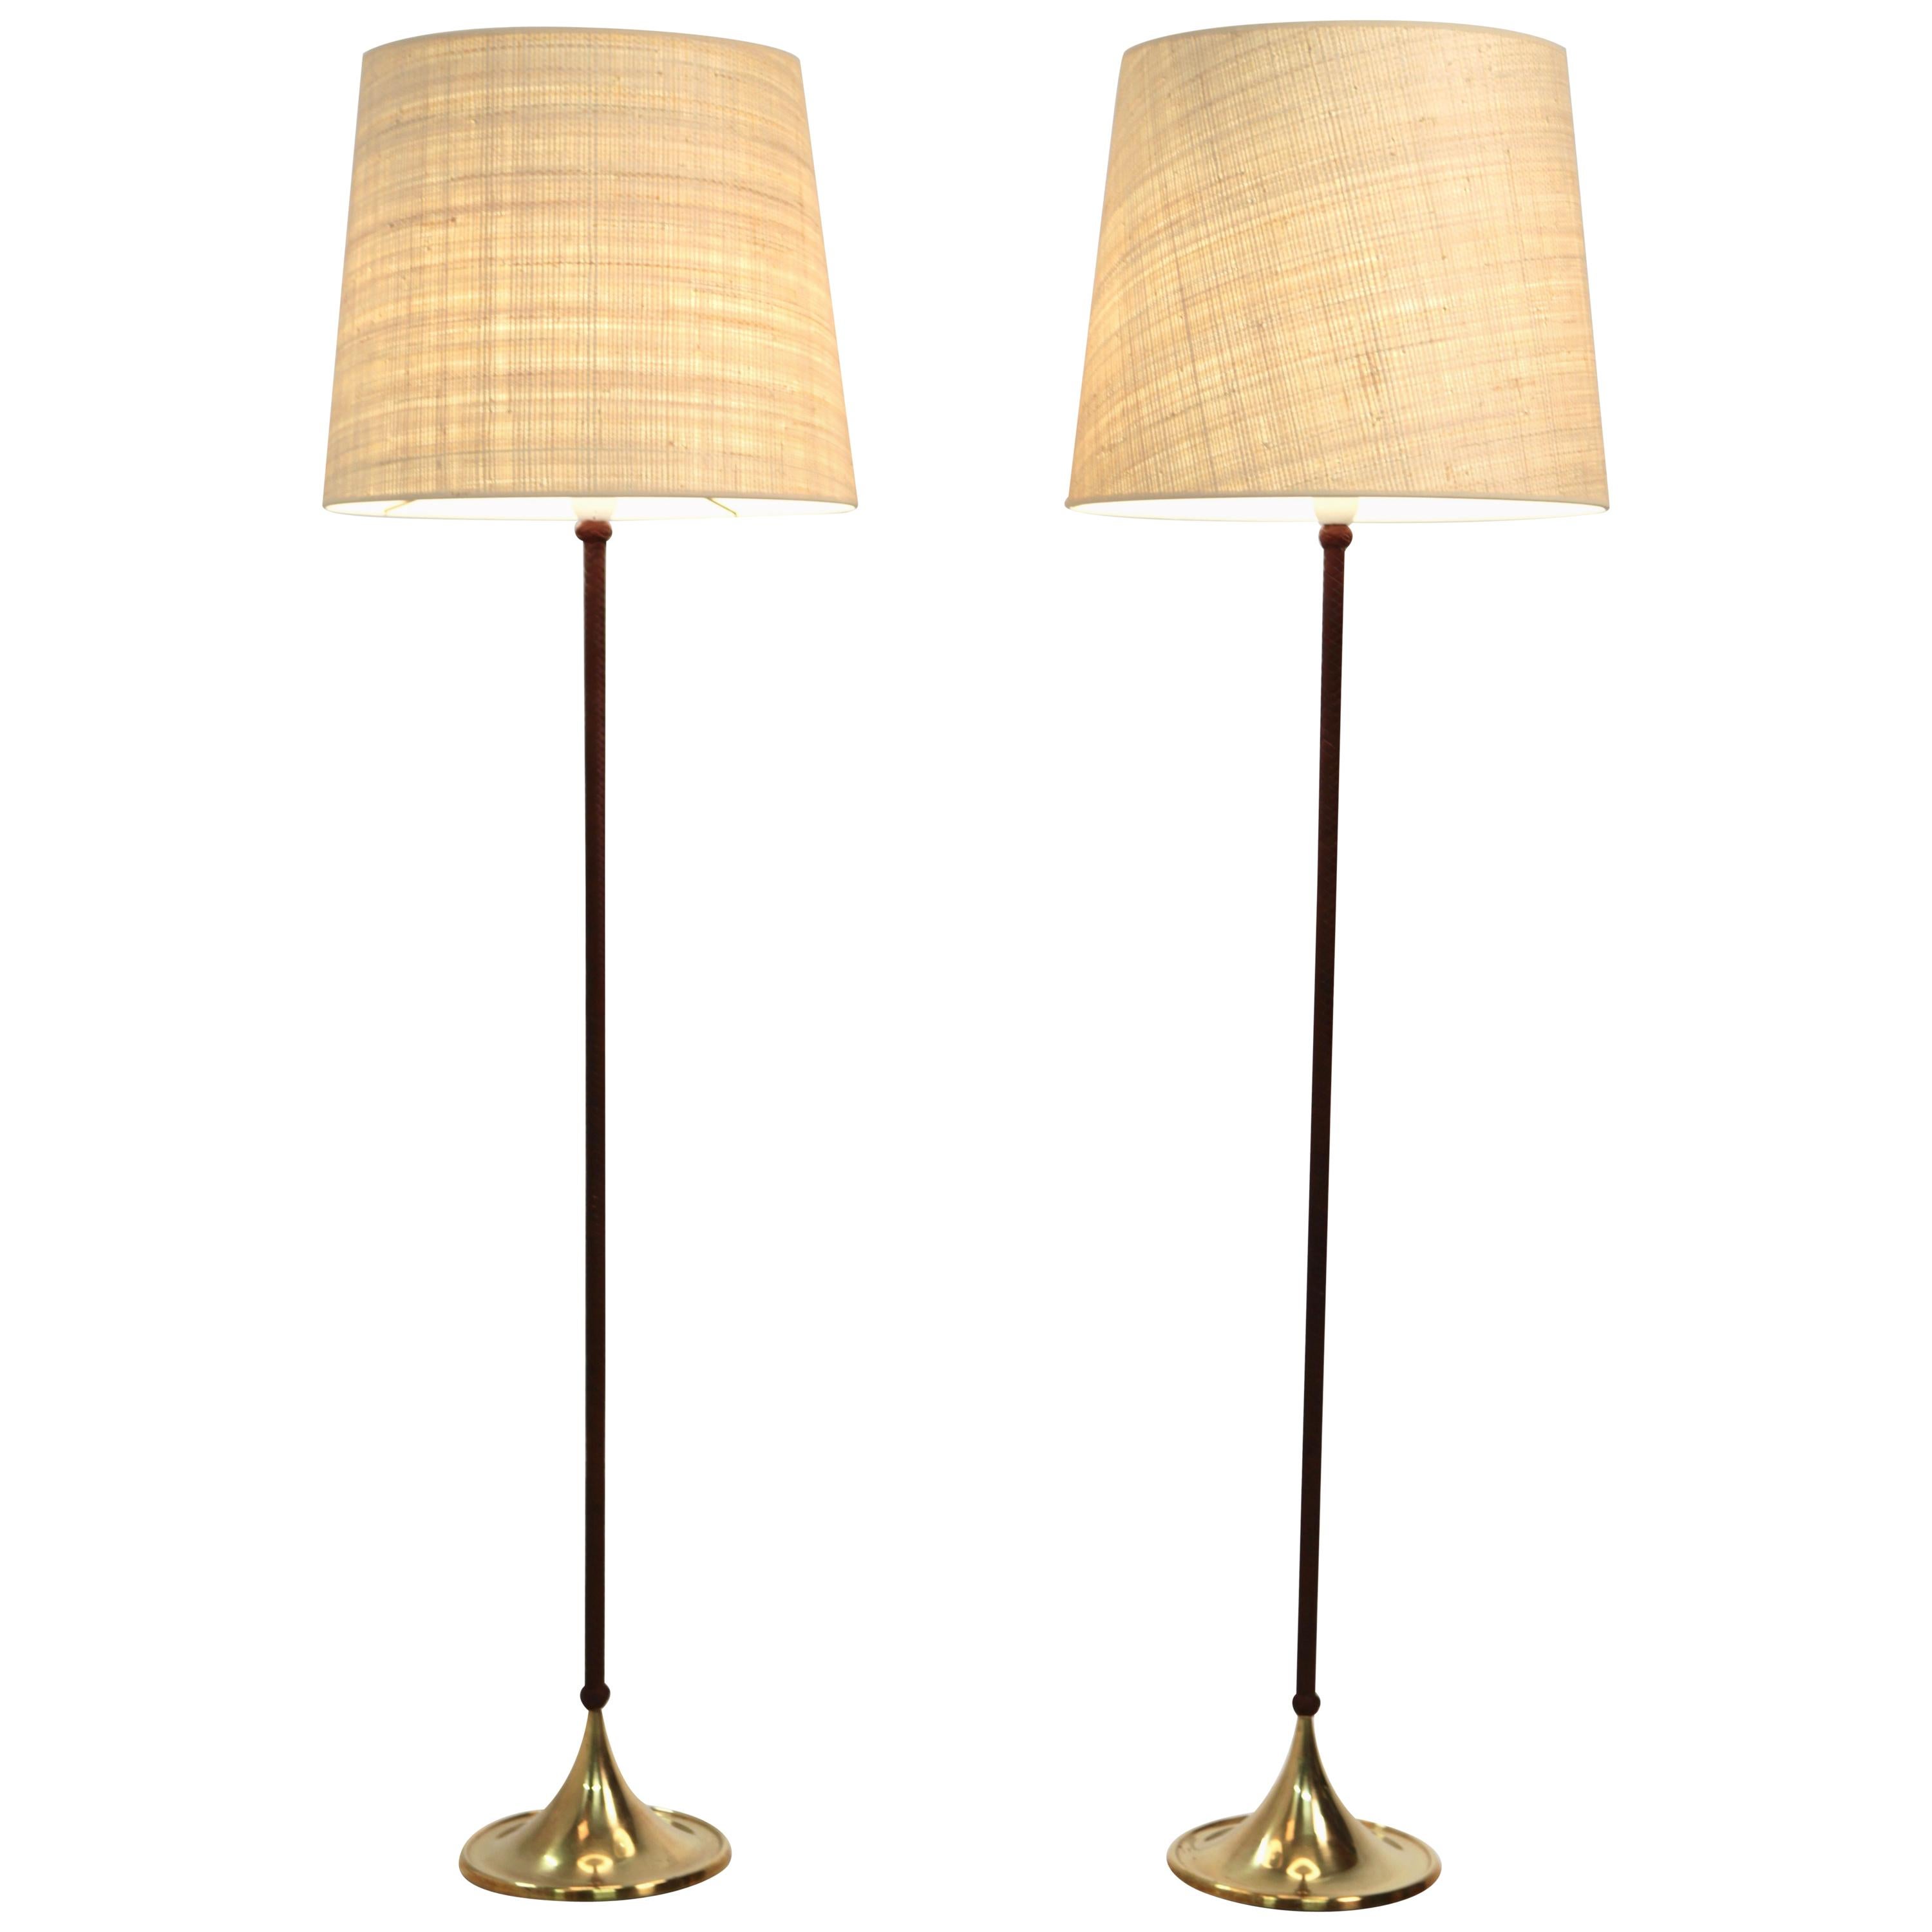 Pair of Rare Bergboms Floor Lamps, G-025, Brass and Leather, Sweden, 1950s